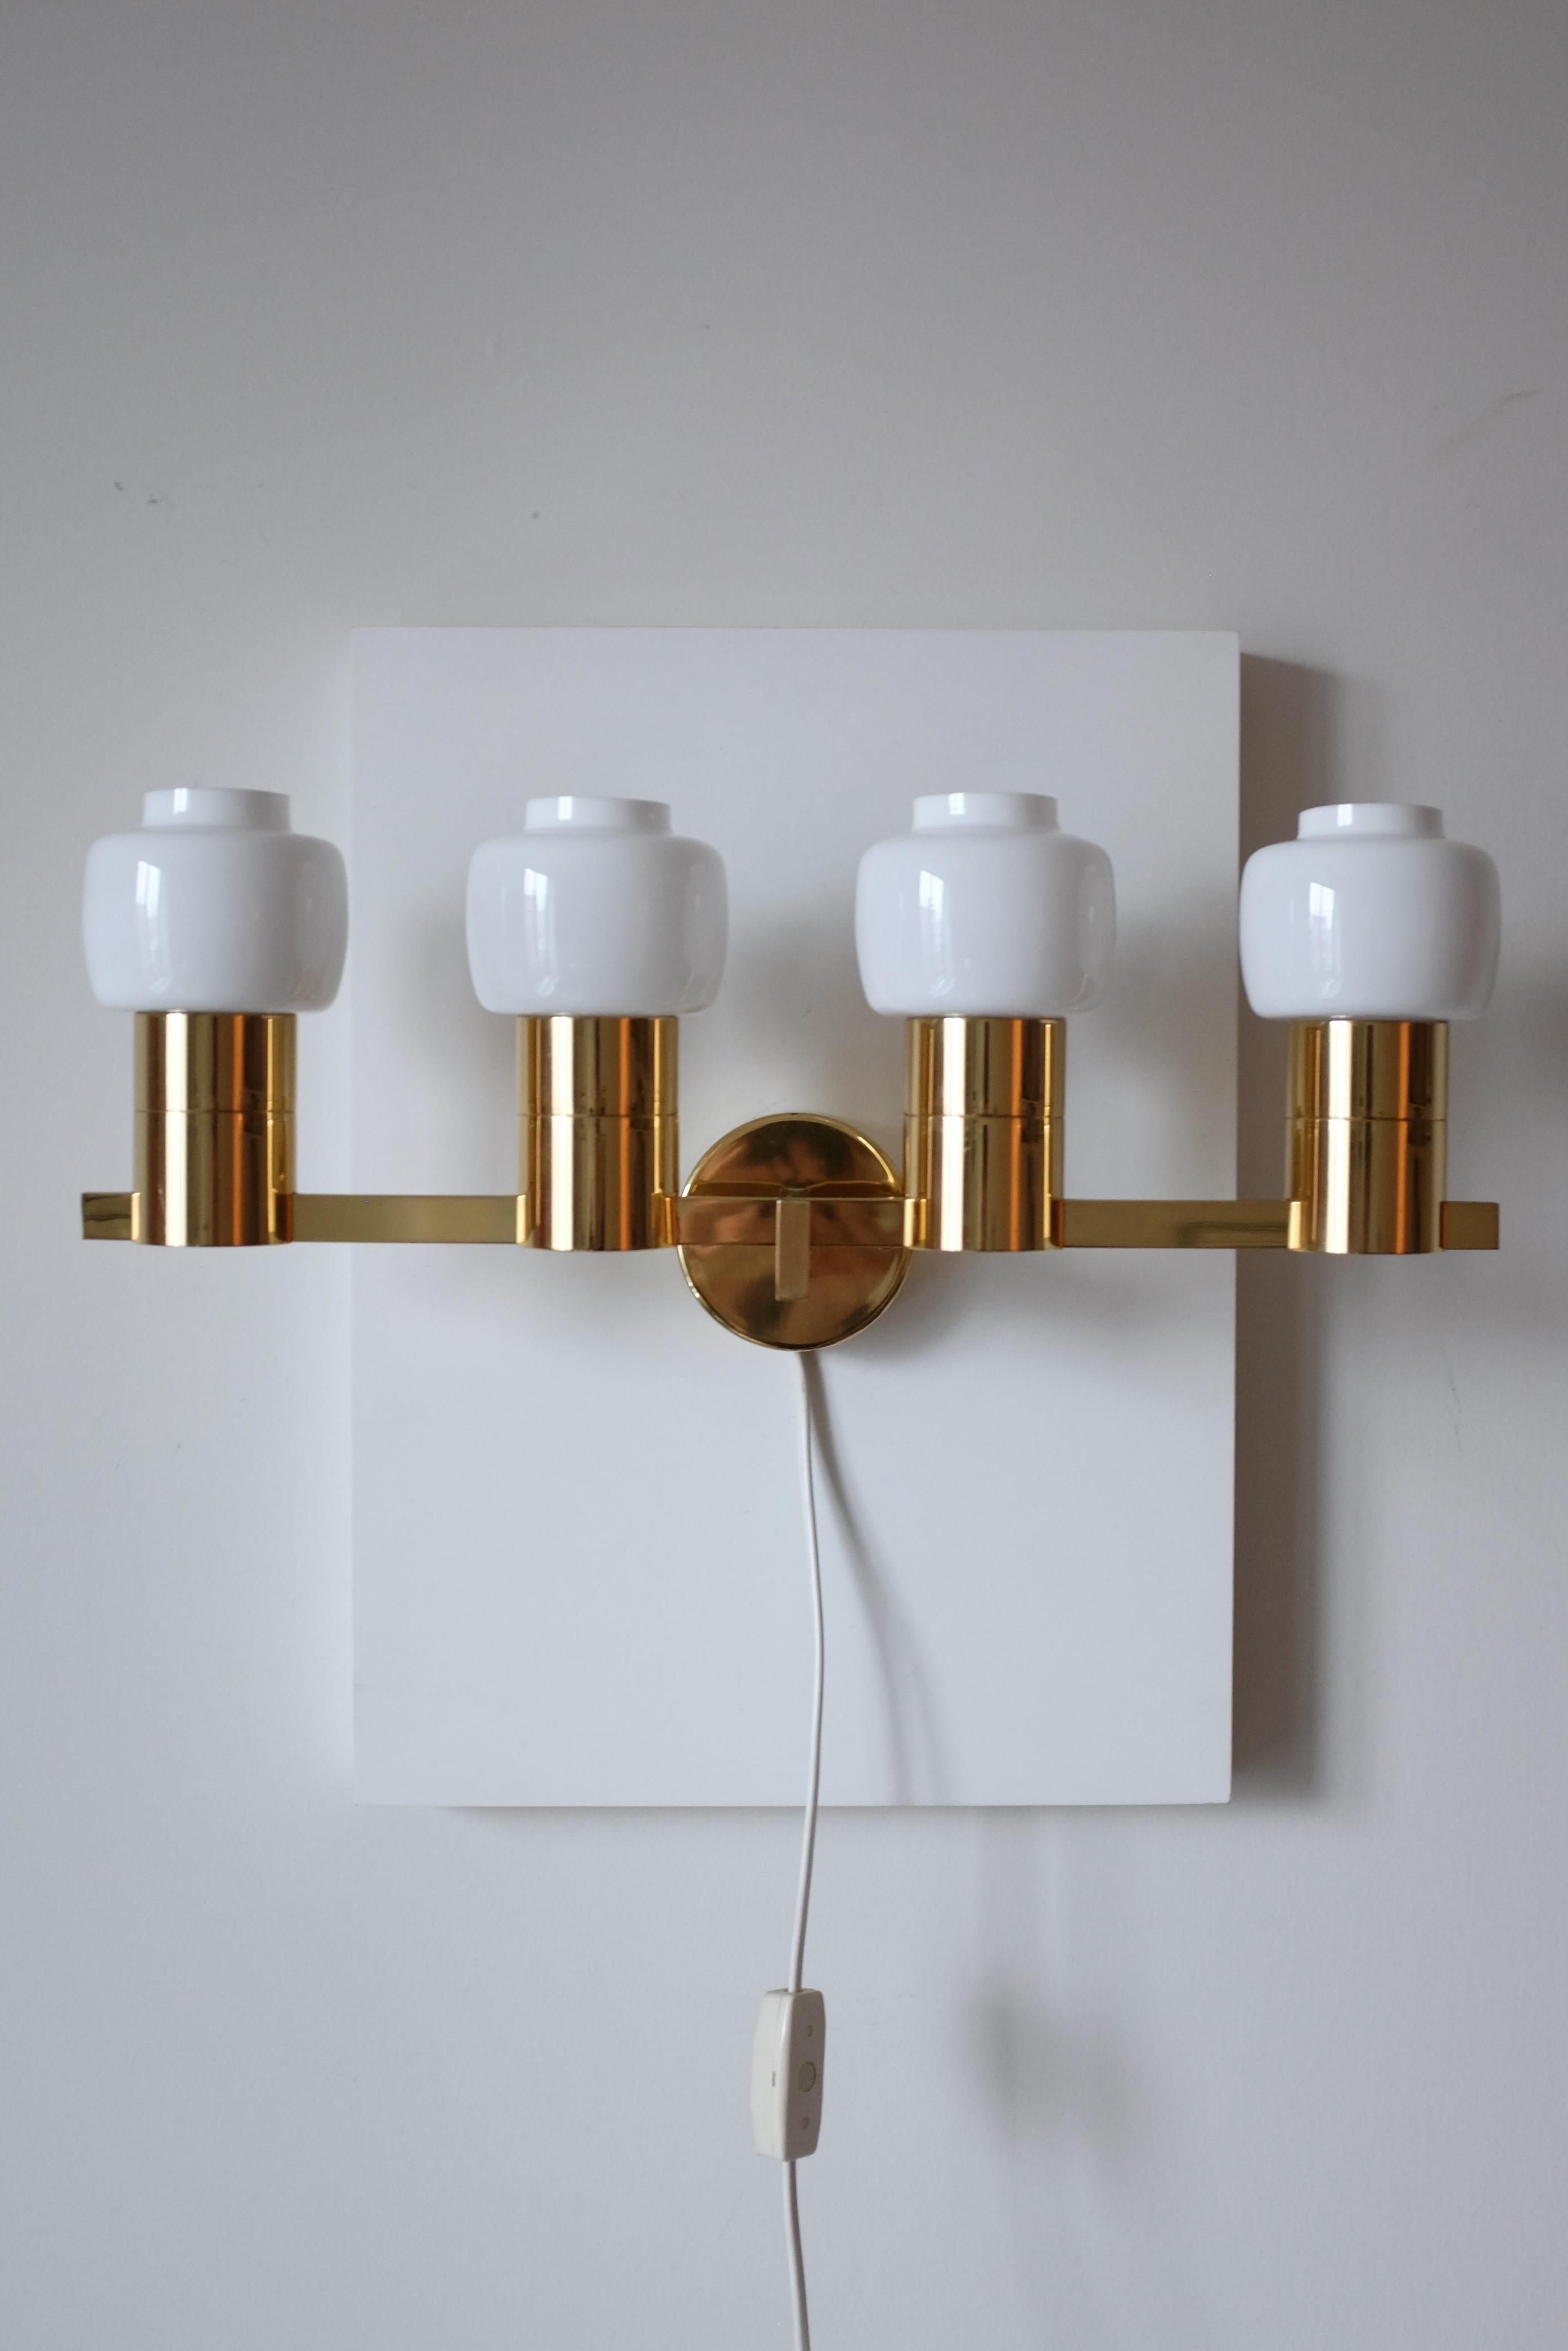 Stunning Vintage Wall Lamp Model V-306/4 by Hans-Agne Jakobsson for his eponymous light firm in Sweden. This piece have 4 lamp arms both with a milky white lamp lanterns with labels attached. In great vintage condition with few signs of wear to the